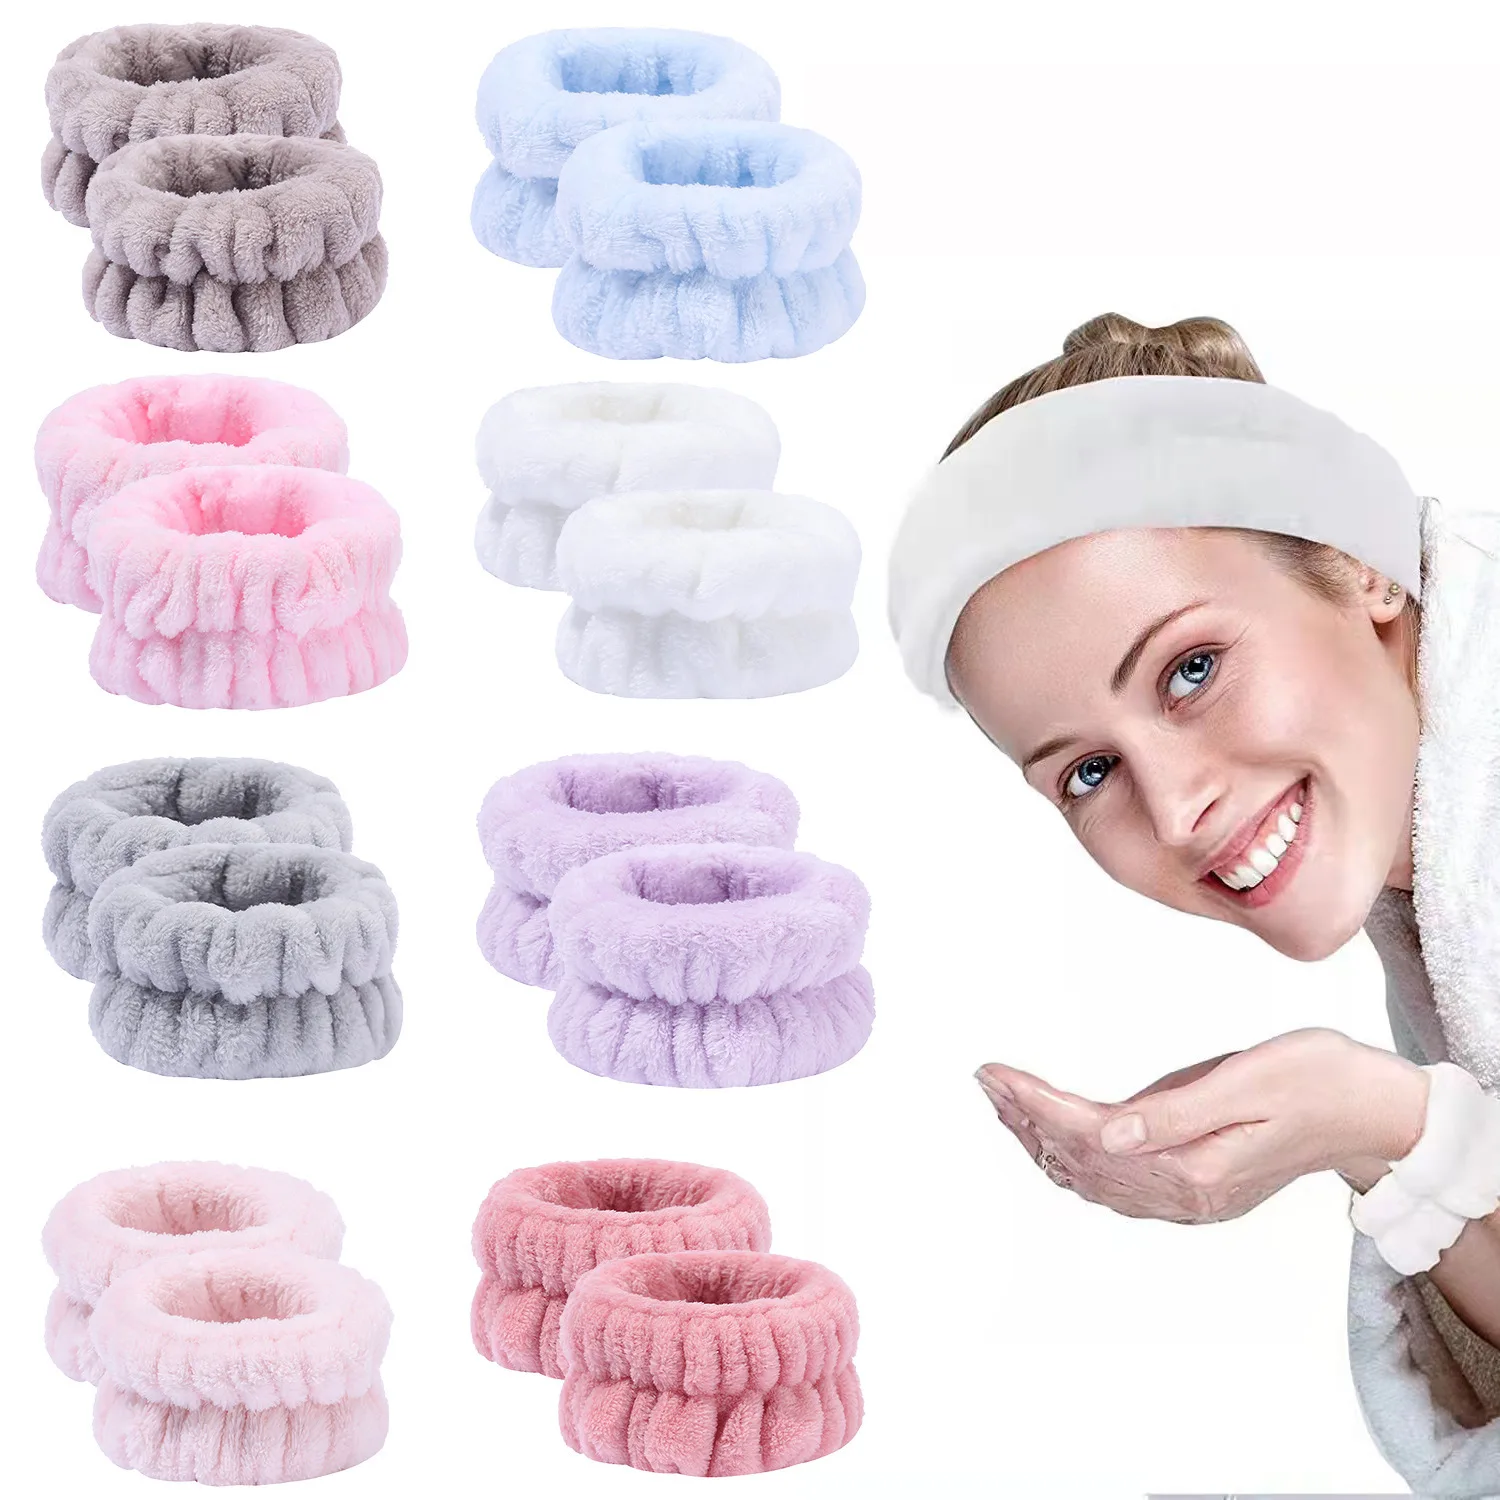 

Washing Face Spa Wrist Washband Microfiber Absorbent Women Your Arms Soft To Touch For Yoga Running Face Wash Wristbands For